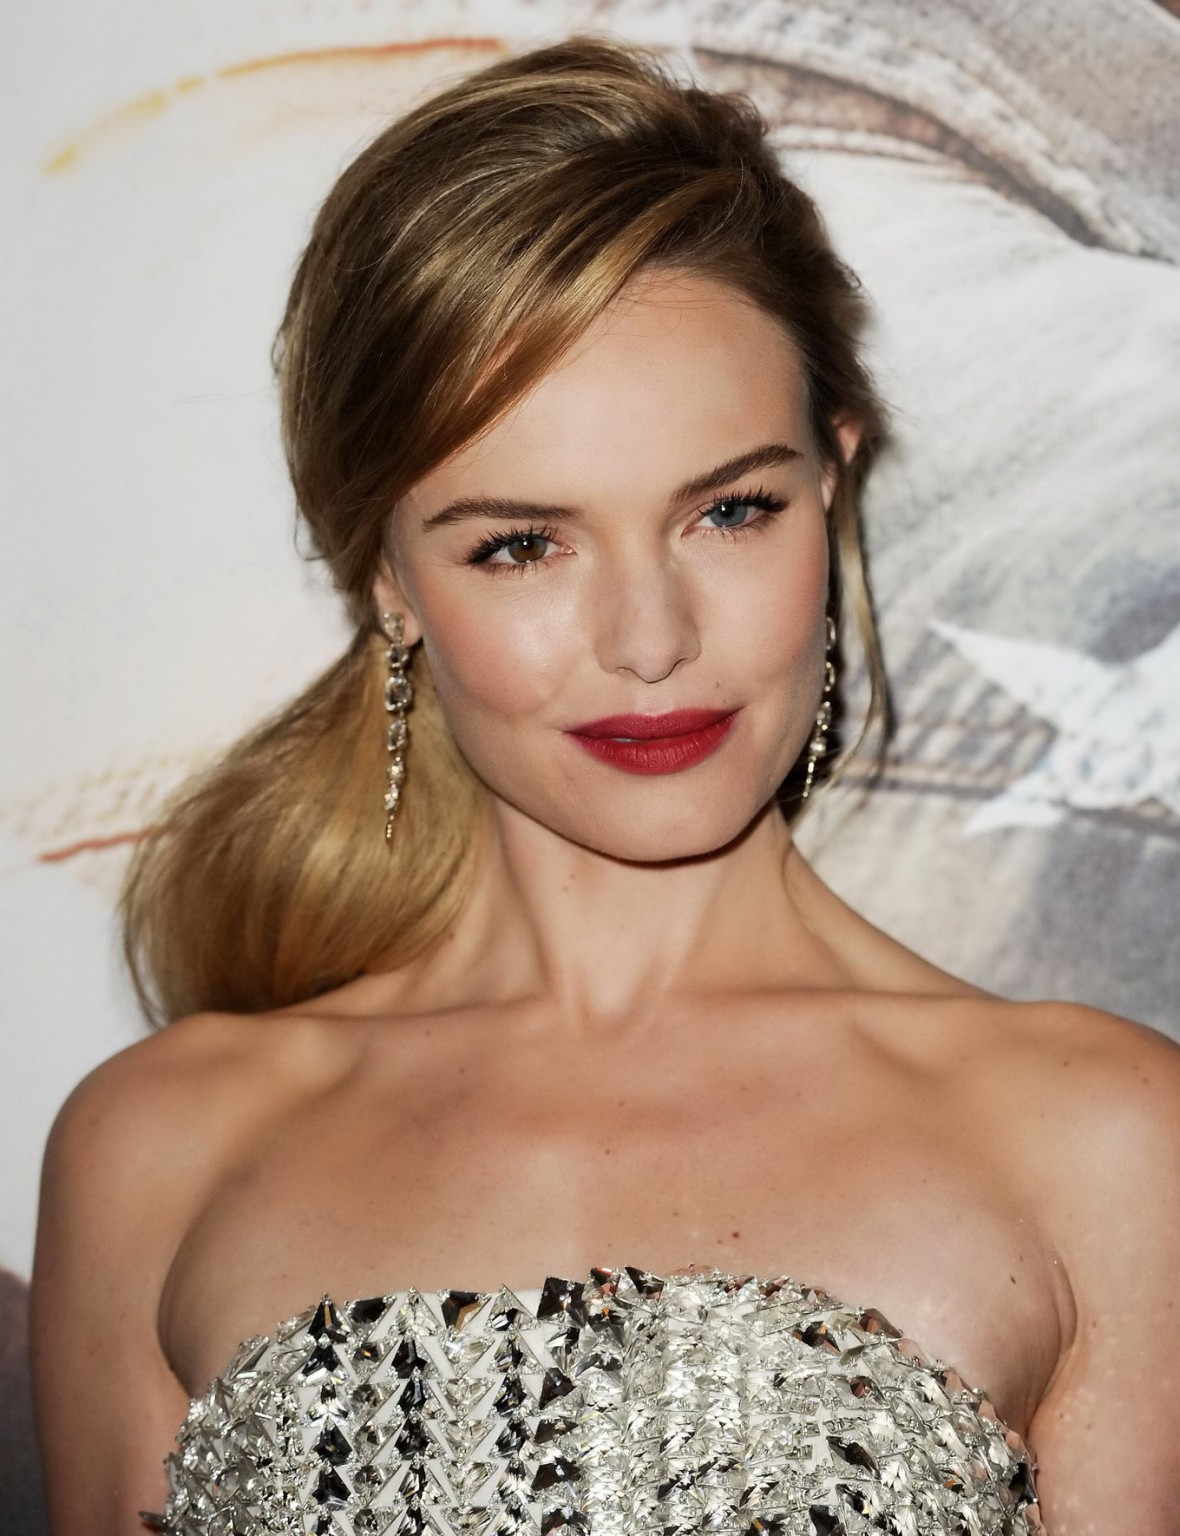 Kate Bosworth wearing shiny strapless mini dress at the Homefront premiere in La #75212317